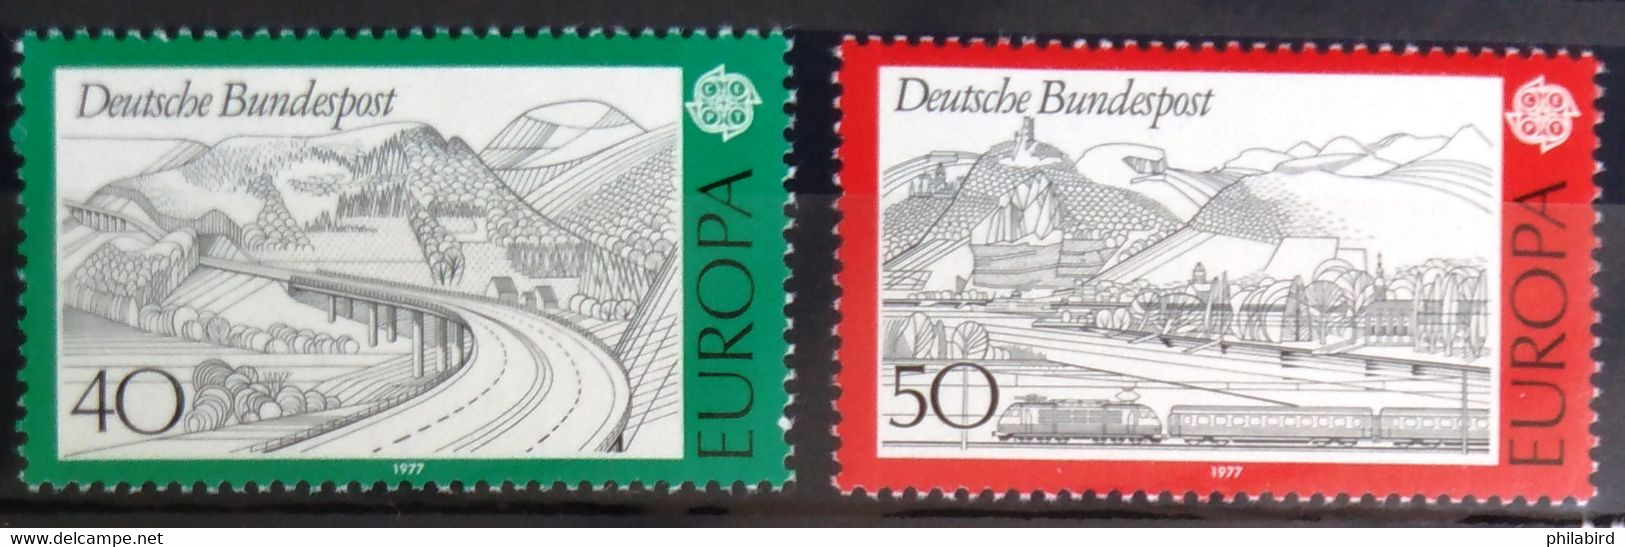 EUROPA 1977 - ALLEMAGNE                    N° 781/782                        NEUF* - 1977